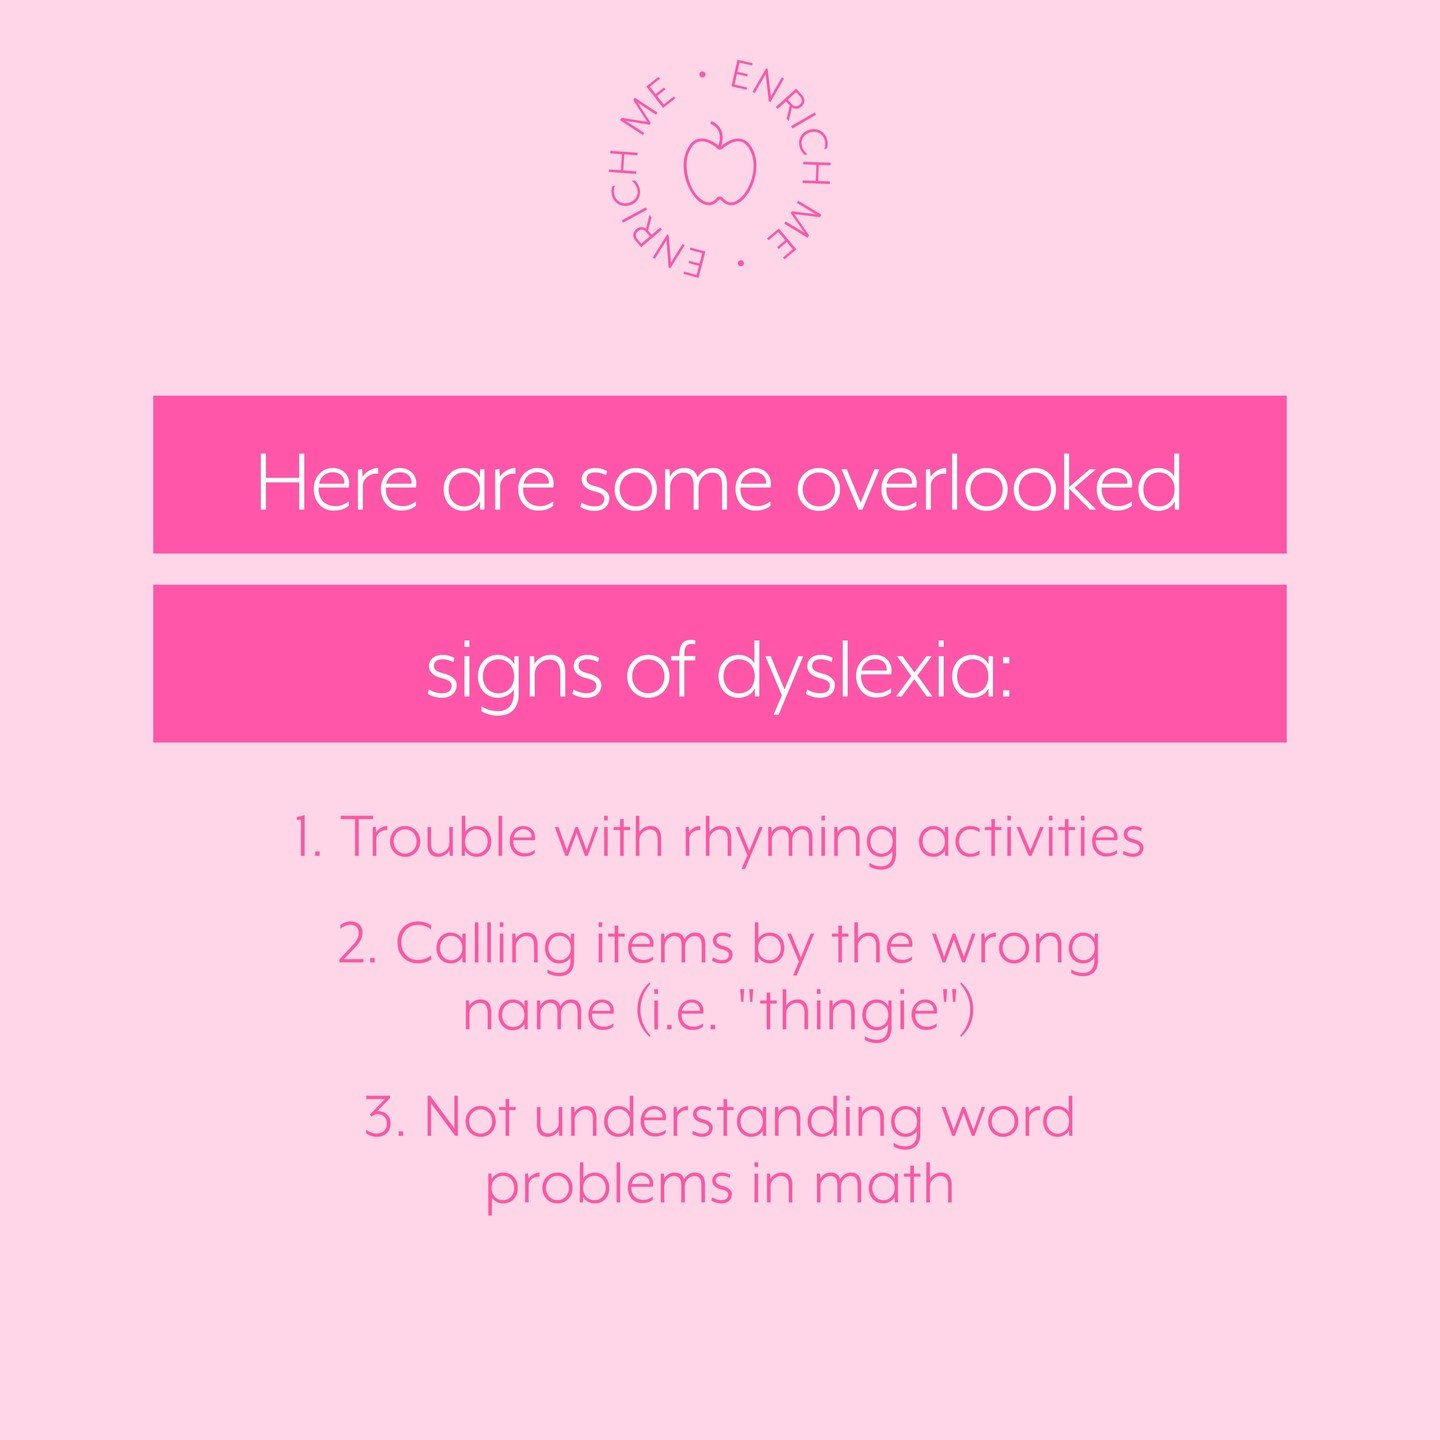 Parents, if your child is having difficulty recognizing or completing rhymes, this is a pink flag! You want to ensure this skill is developing or starting to develop by the age of 5 or 6. It can absolutely be a sign that your child has a neurodiverge